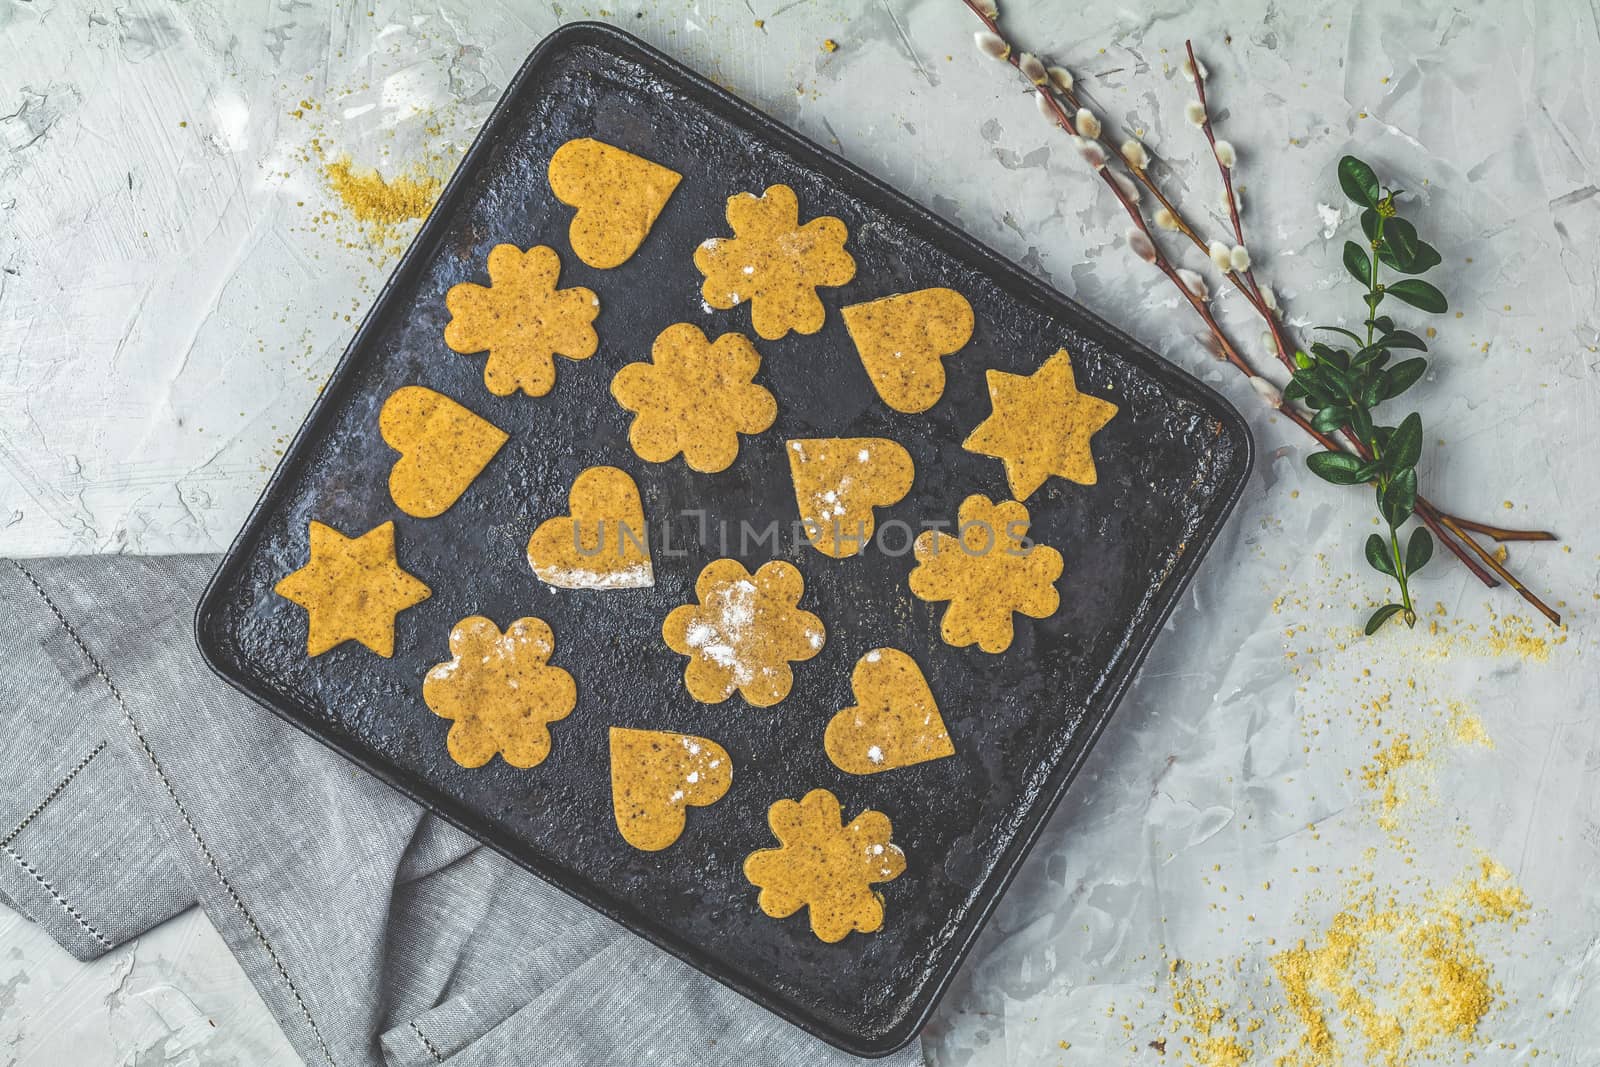 Culinary Spring or Christmas food background. Raw uncooked ginger cookies in baking dish on light gray concrete surface. View from above, copy space for text